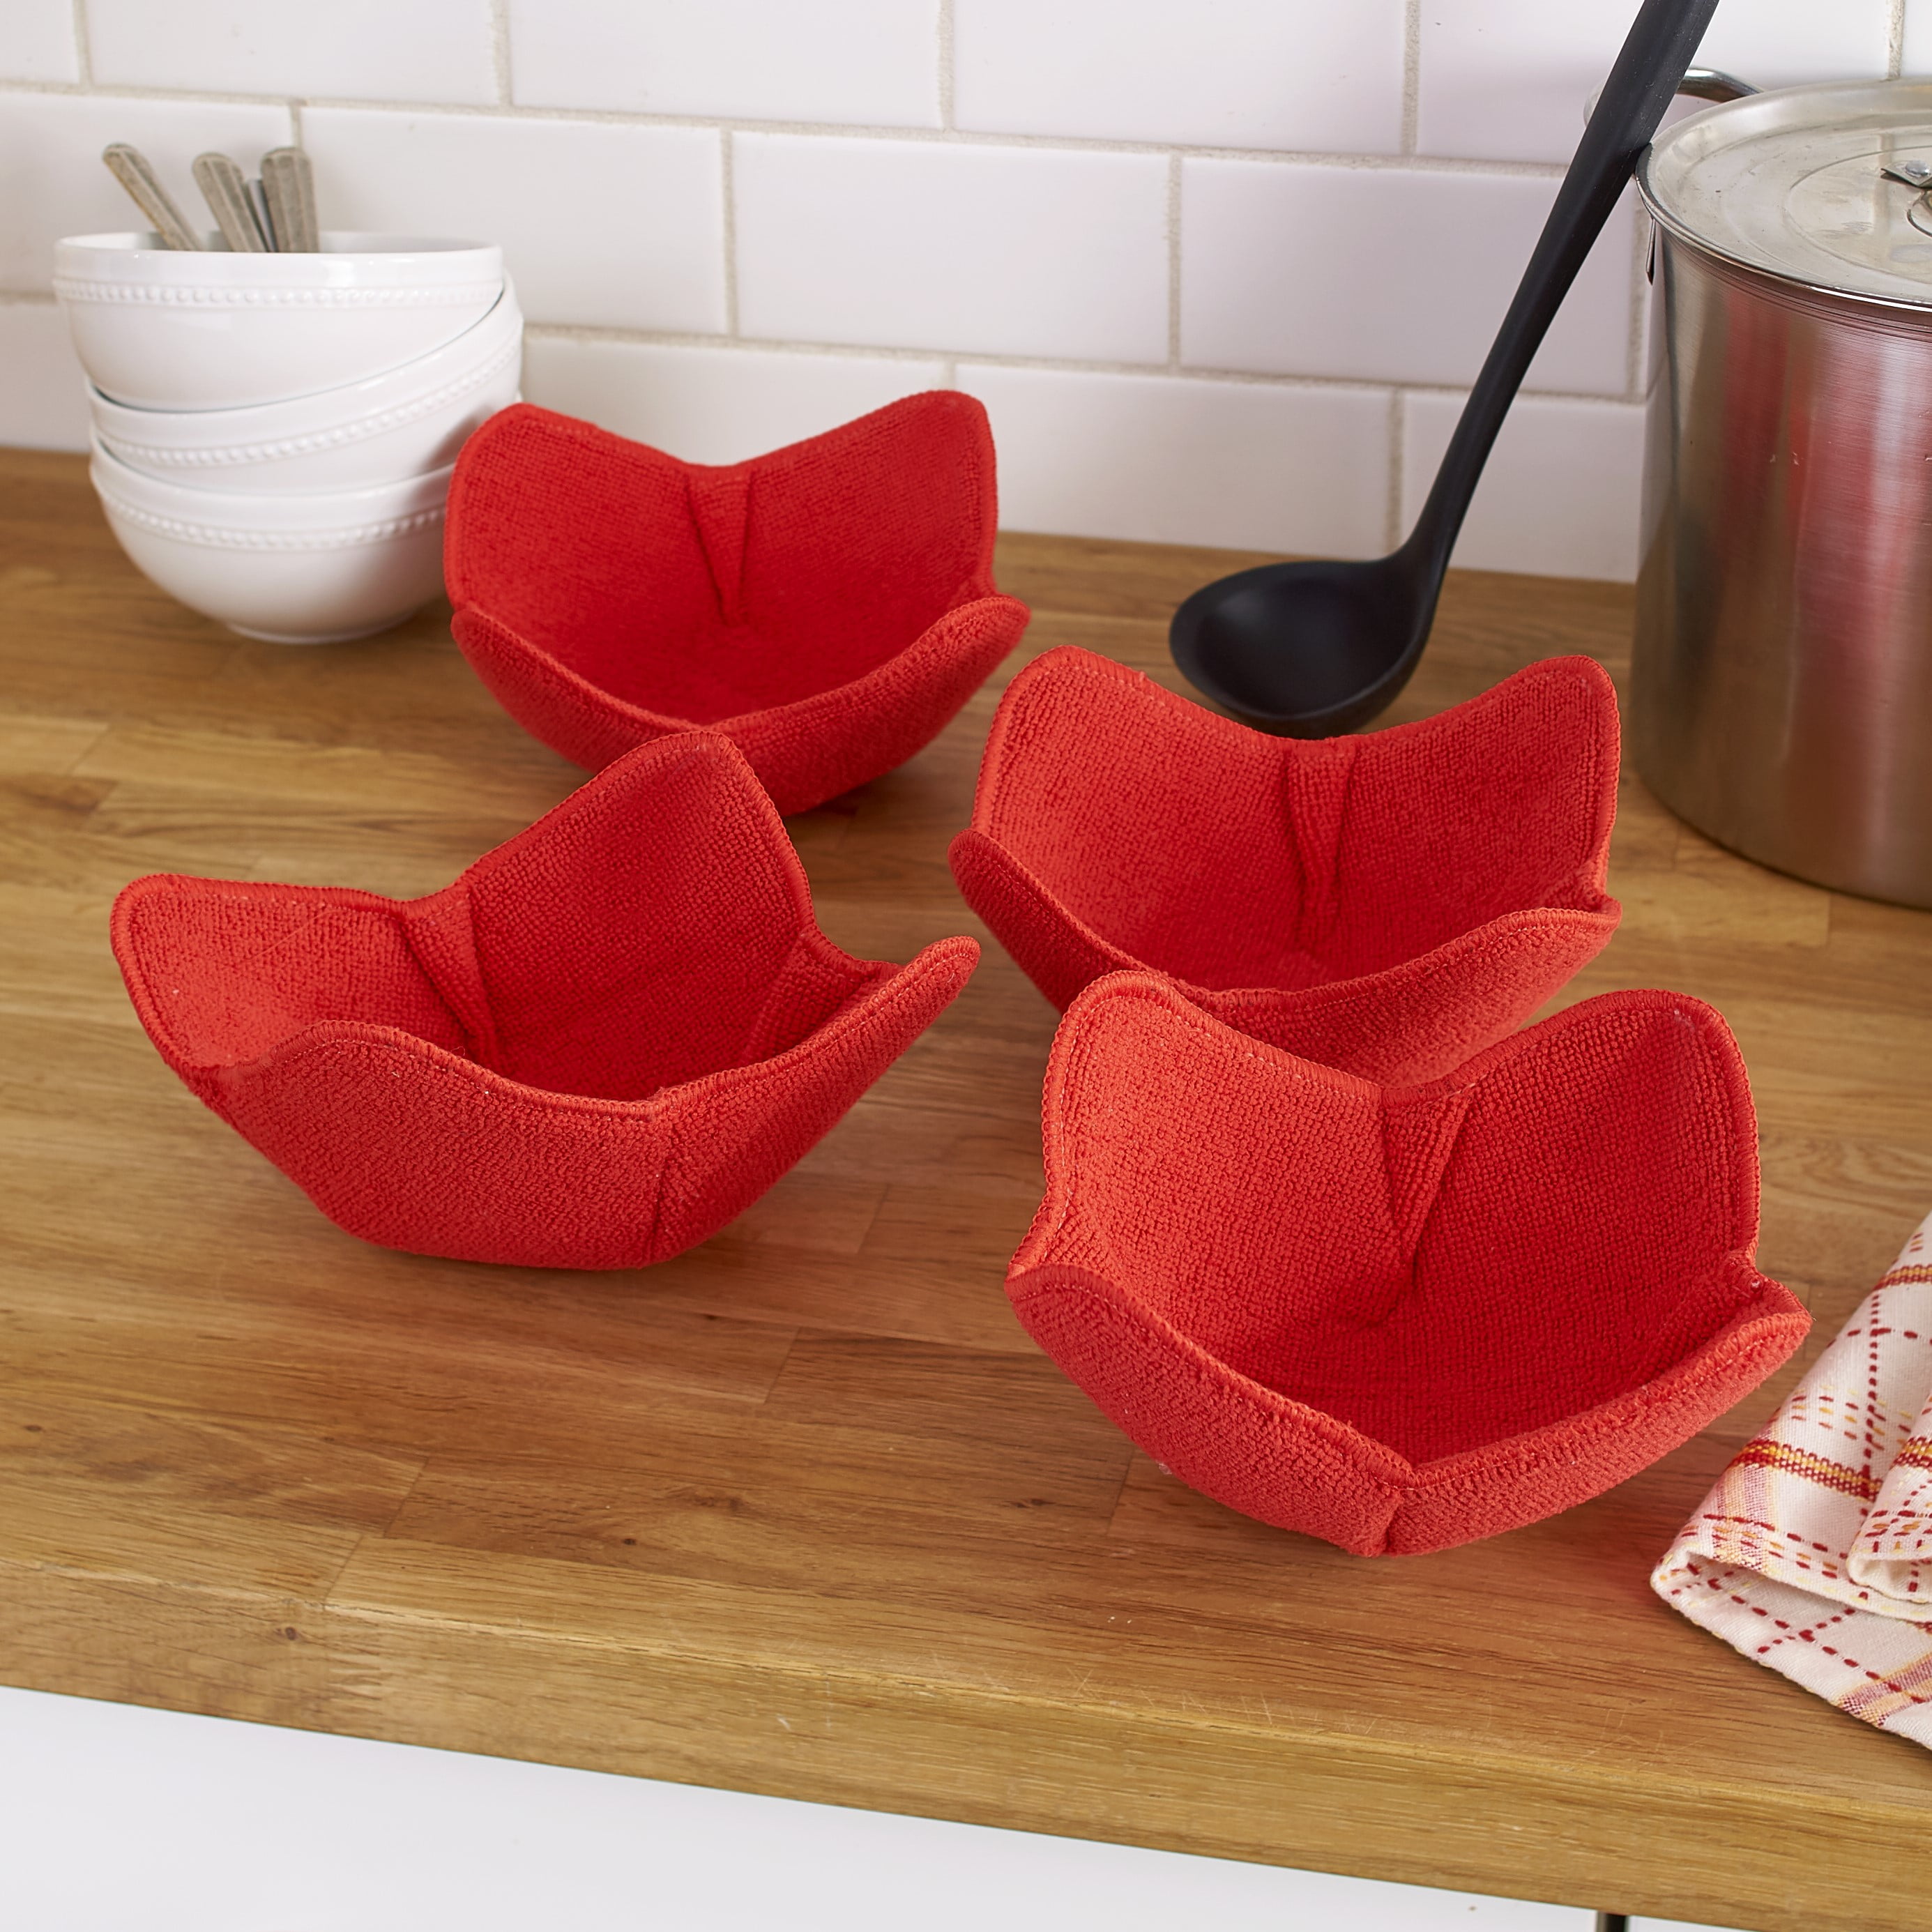 Microwave Pot Holders - Large (3 Fabric Options)